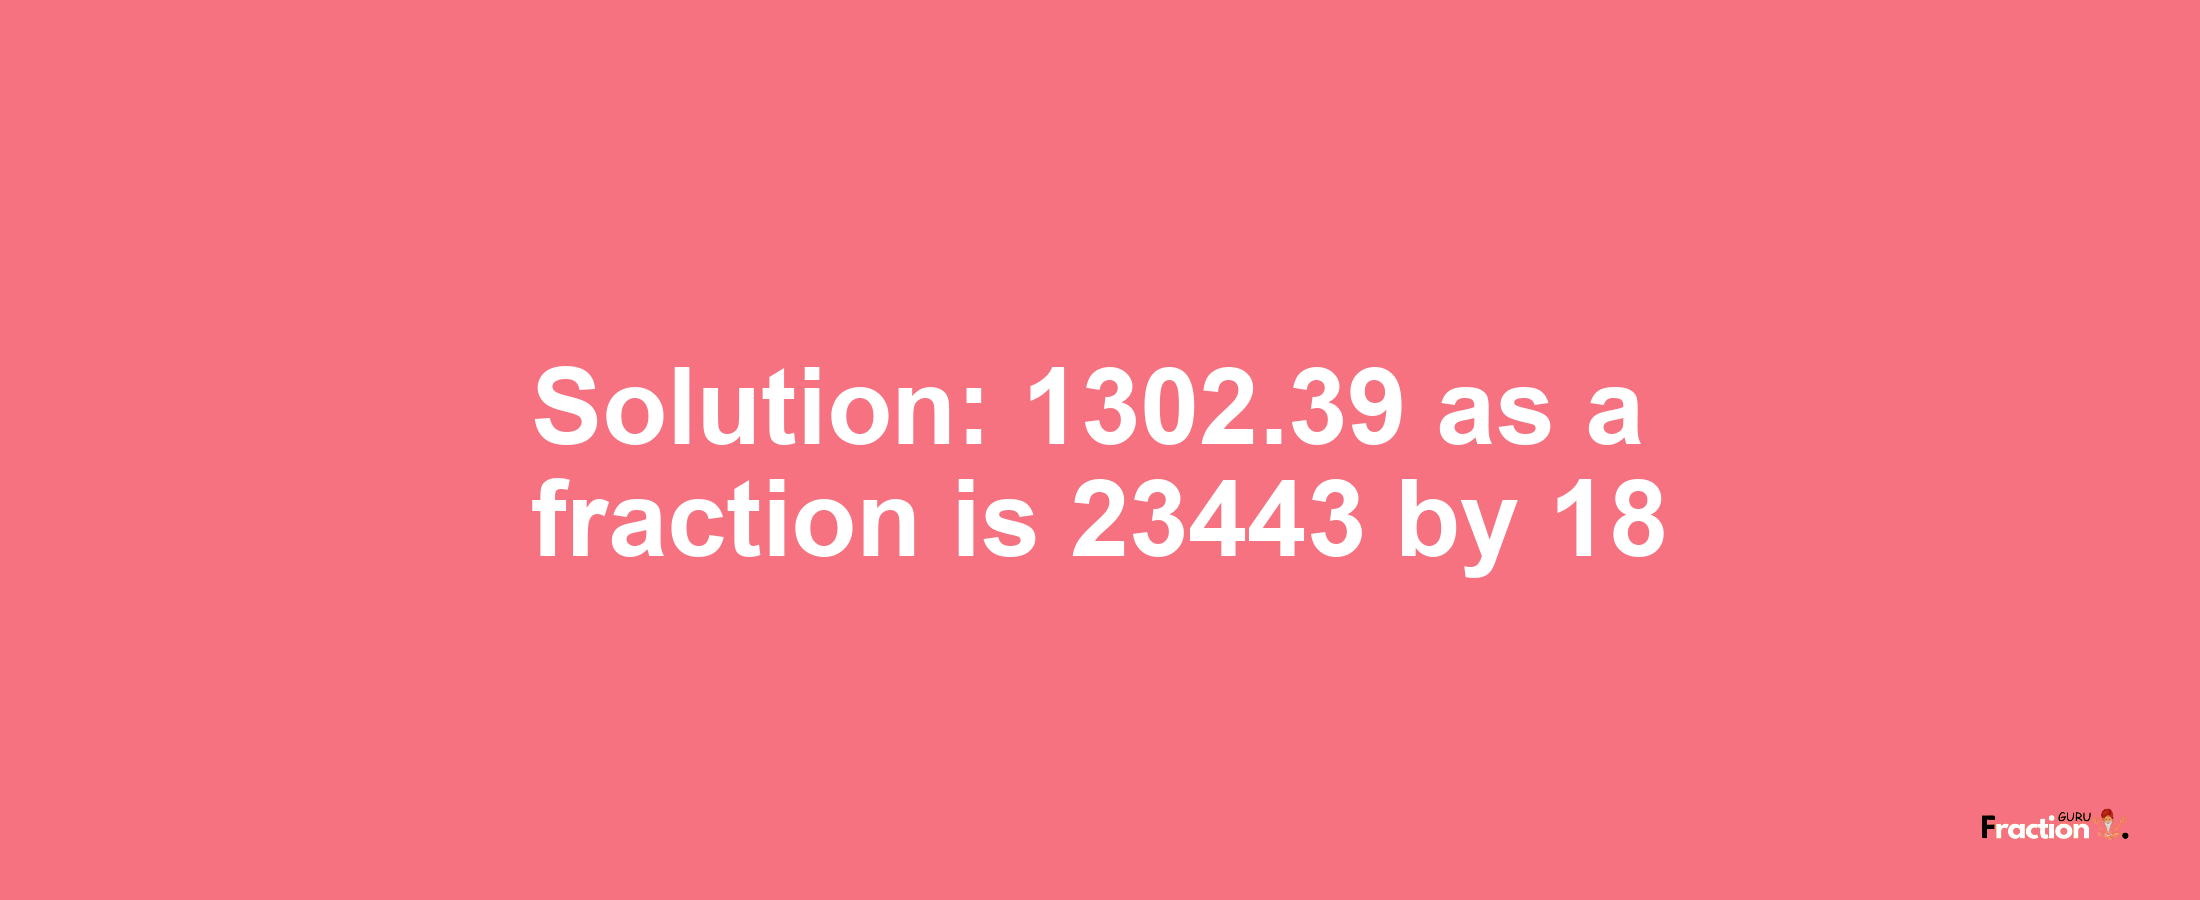 Solution:1302.39 as a fraction is 23443/18